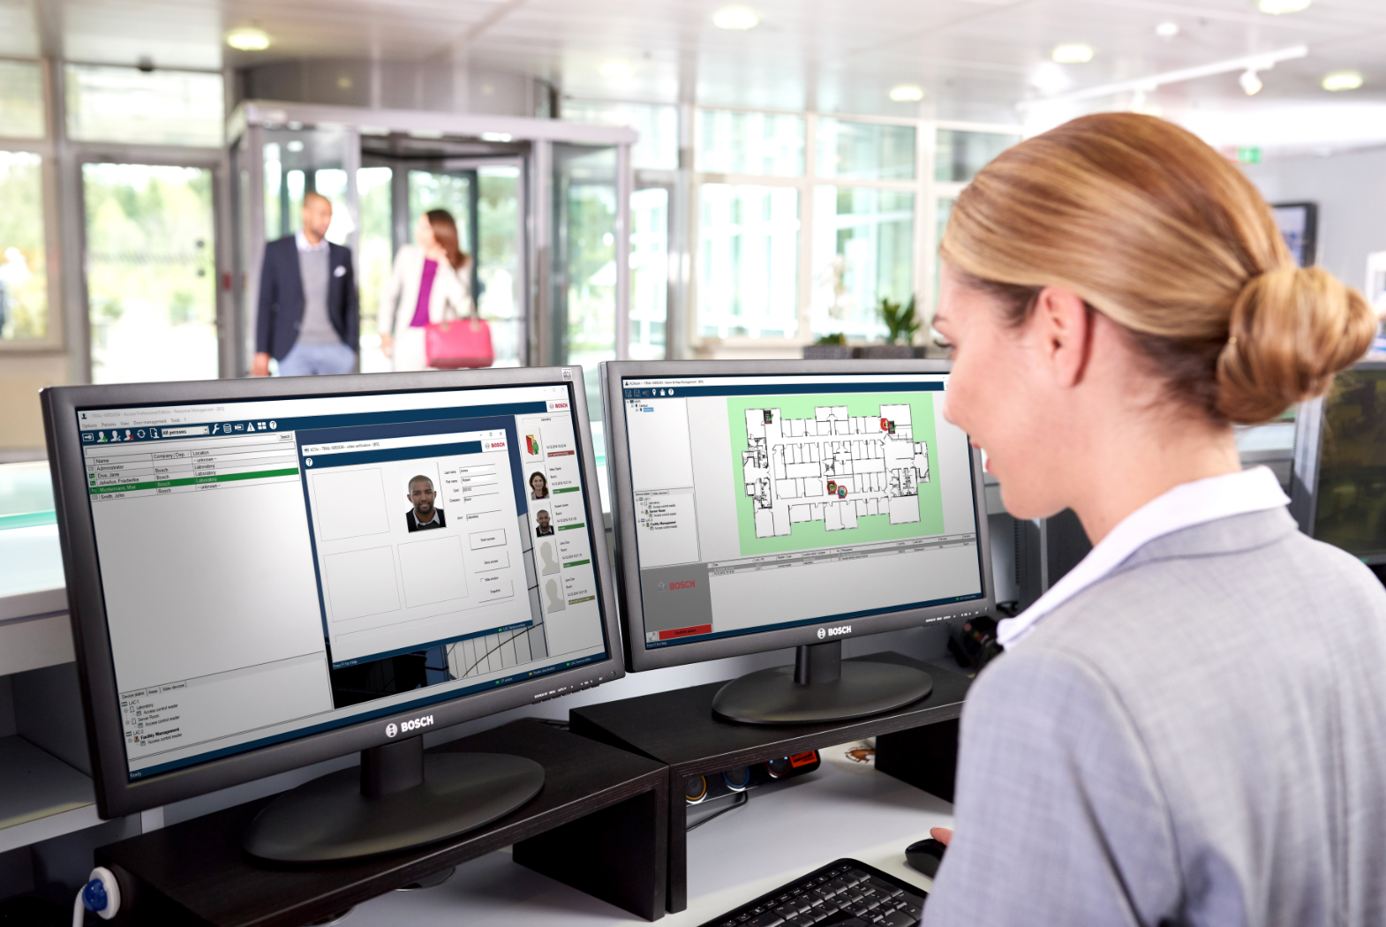 Bosch further increases access security